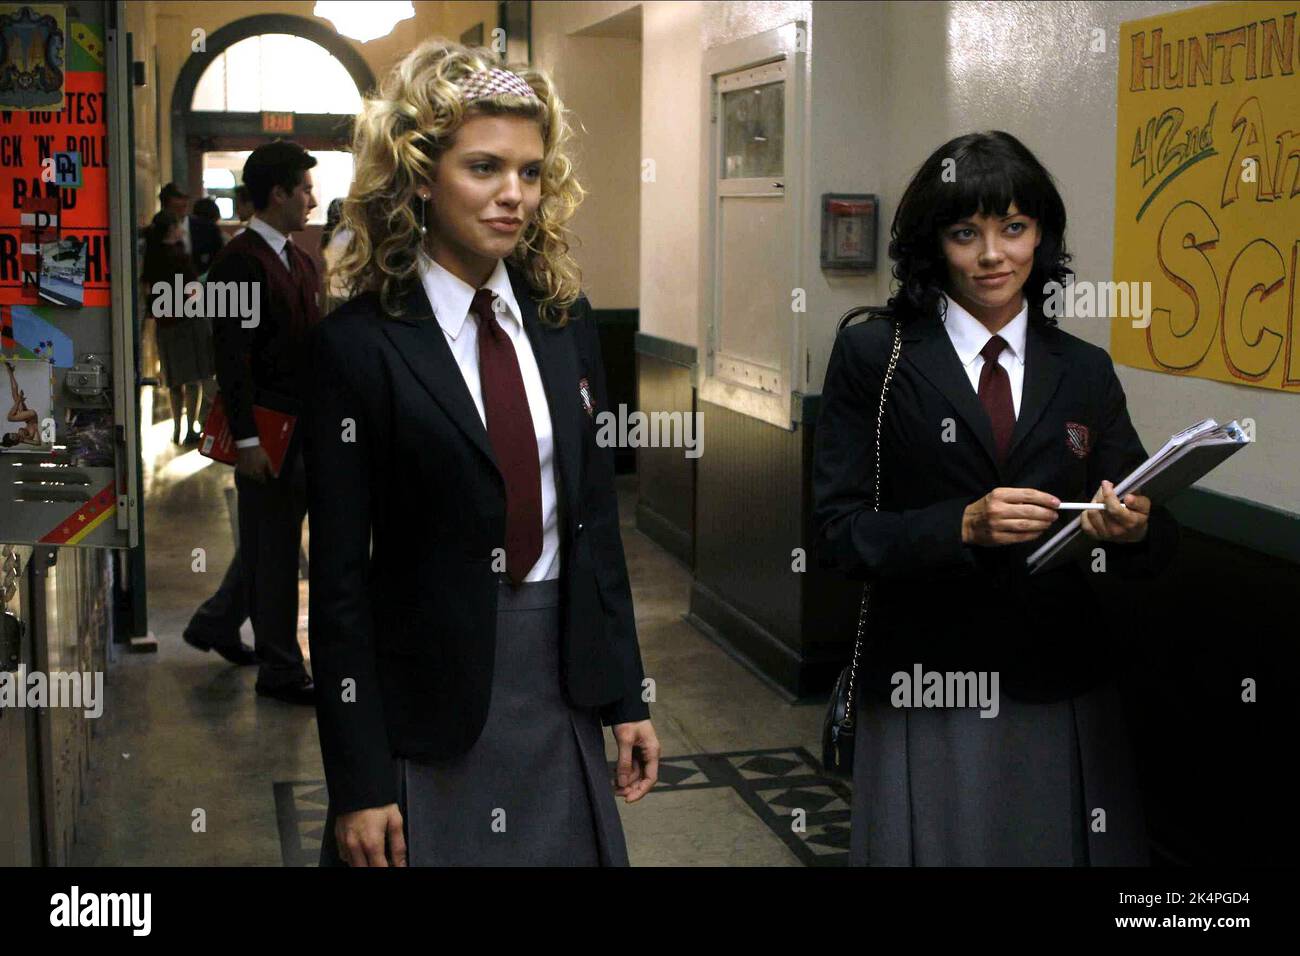 ANNALYNNE MCCORD, THE HAUNTING OF MOLLY HARTLEY, 2008 Stock Photo